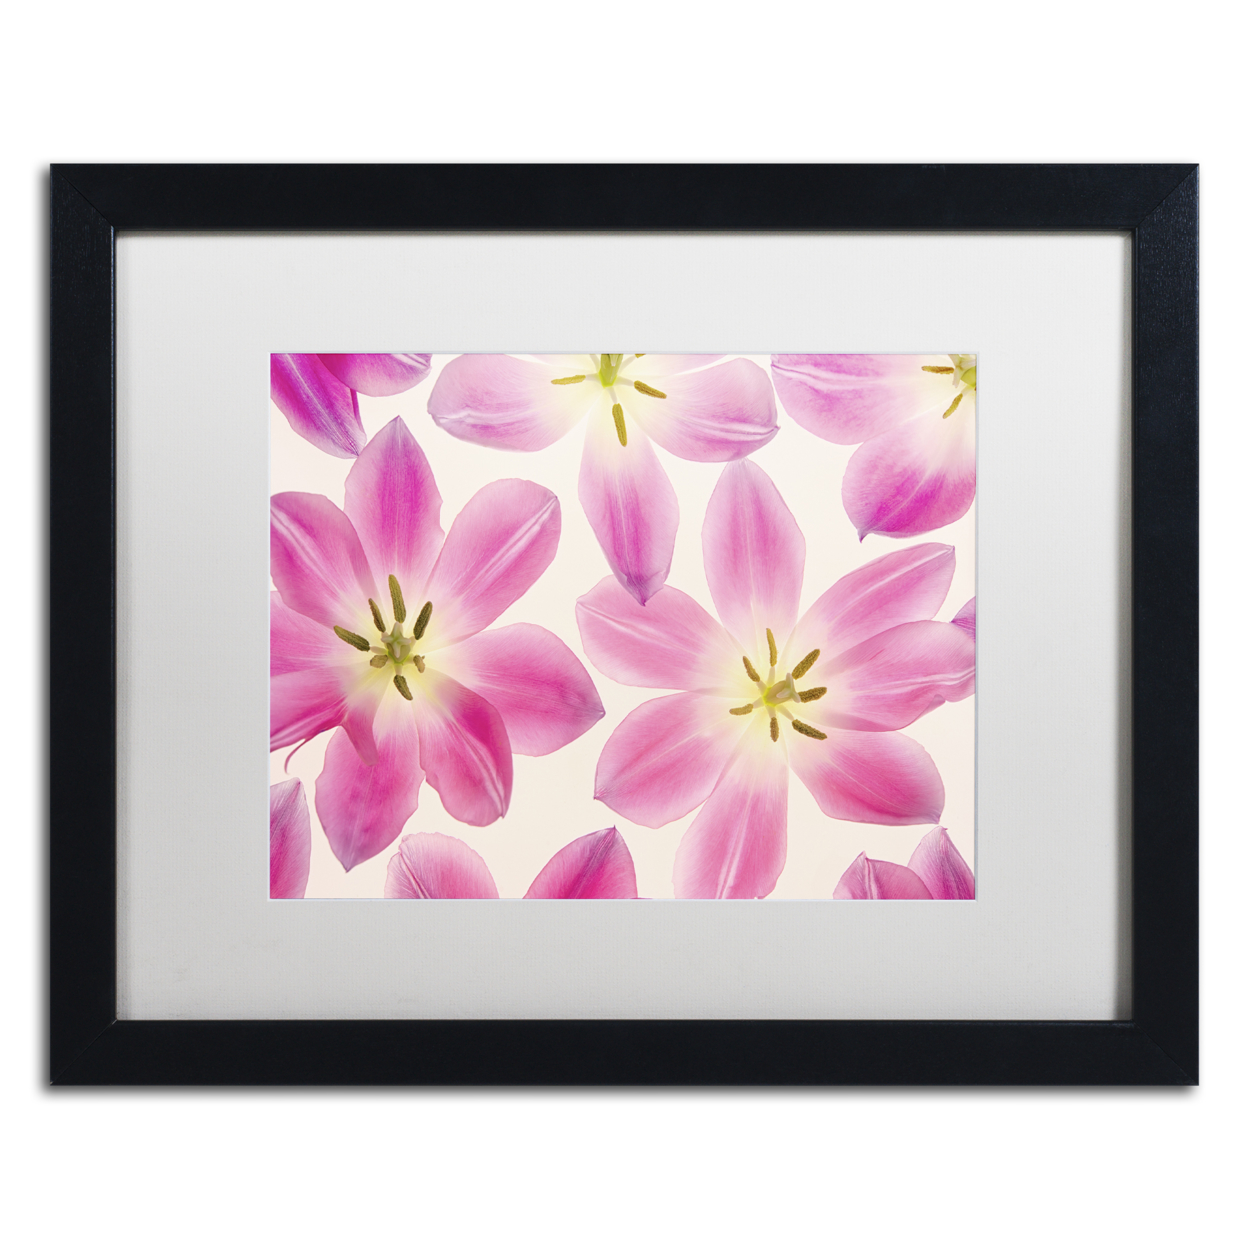 Cora Niele 'Cerise Pink Tulips' Black Wooden Framed Art 18 X 22 Inches